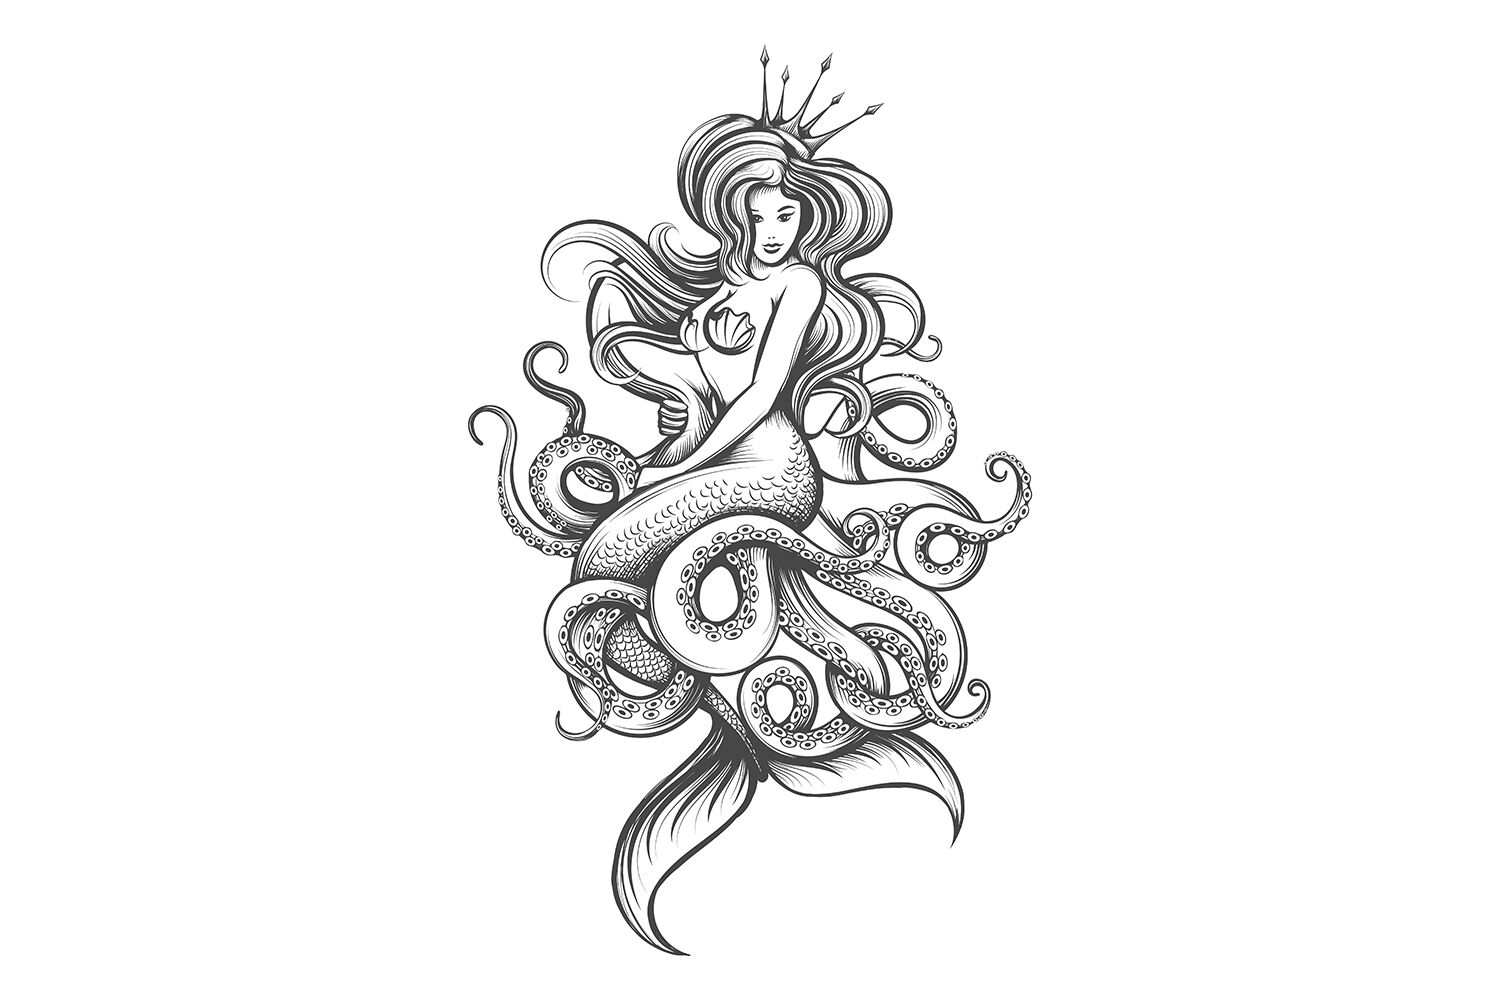 Xpose Tattoos Jaipur - Mermaid tattoos are great depictions of beauty,  mystery, and sensuality. Unlike other tattoo designs, mermaid tattoos are  innately beautiful because what else are mermaids known for? Get Mermaid